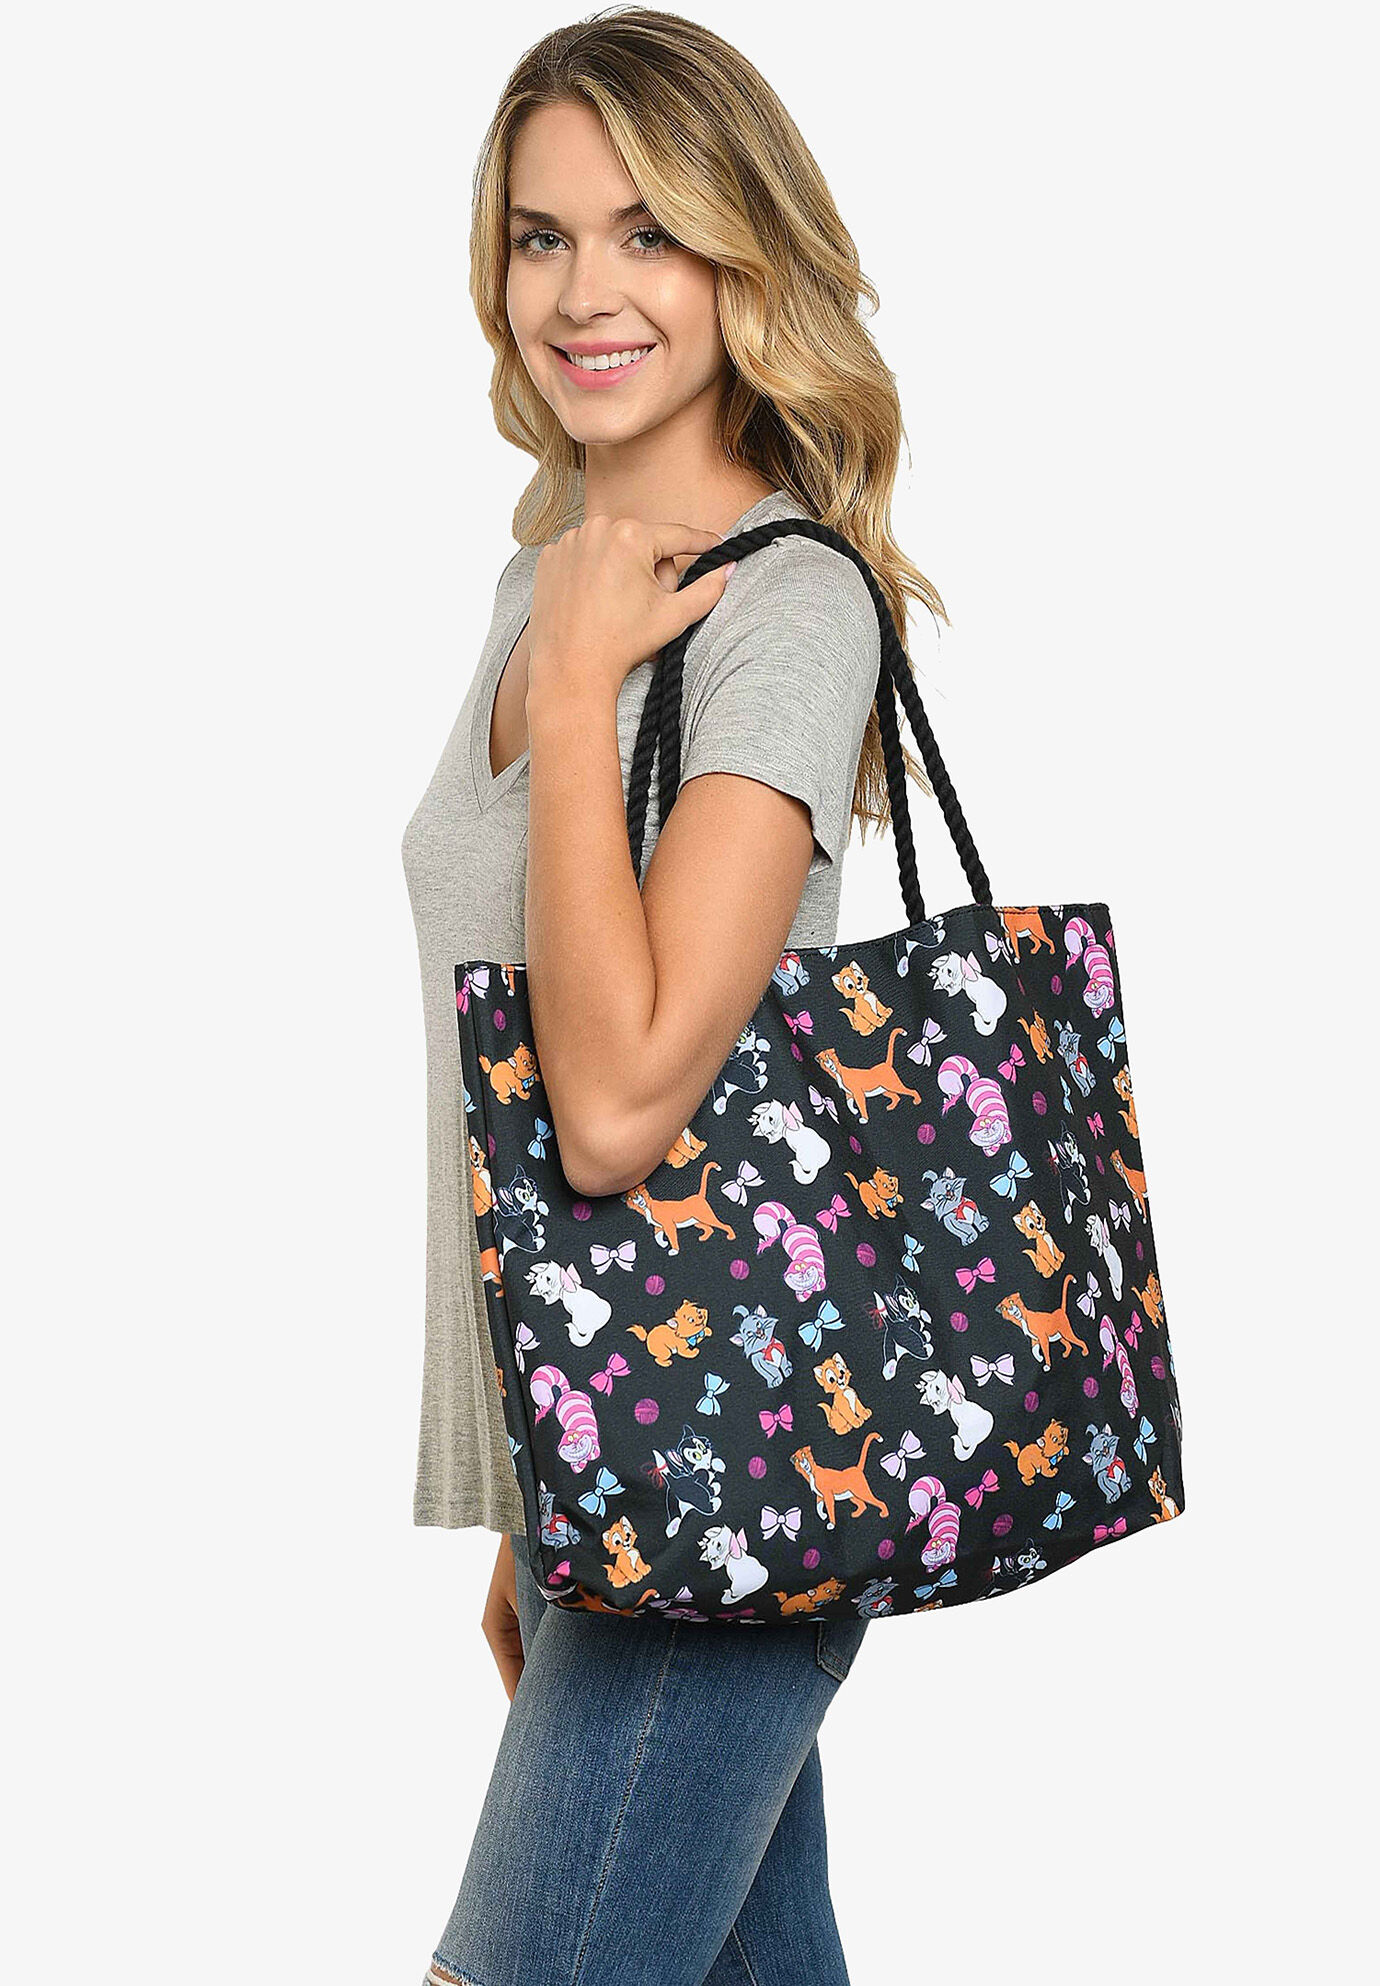 Plus Size Women's Disney Cats Tote Bag Travel Beach Carry-on Cheshire Aristocat Figaro Print by Disney in Black